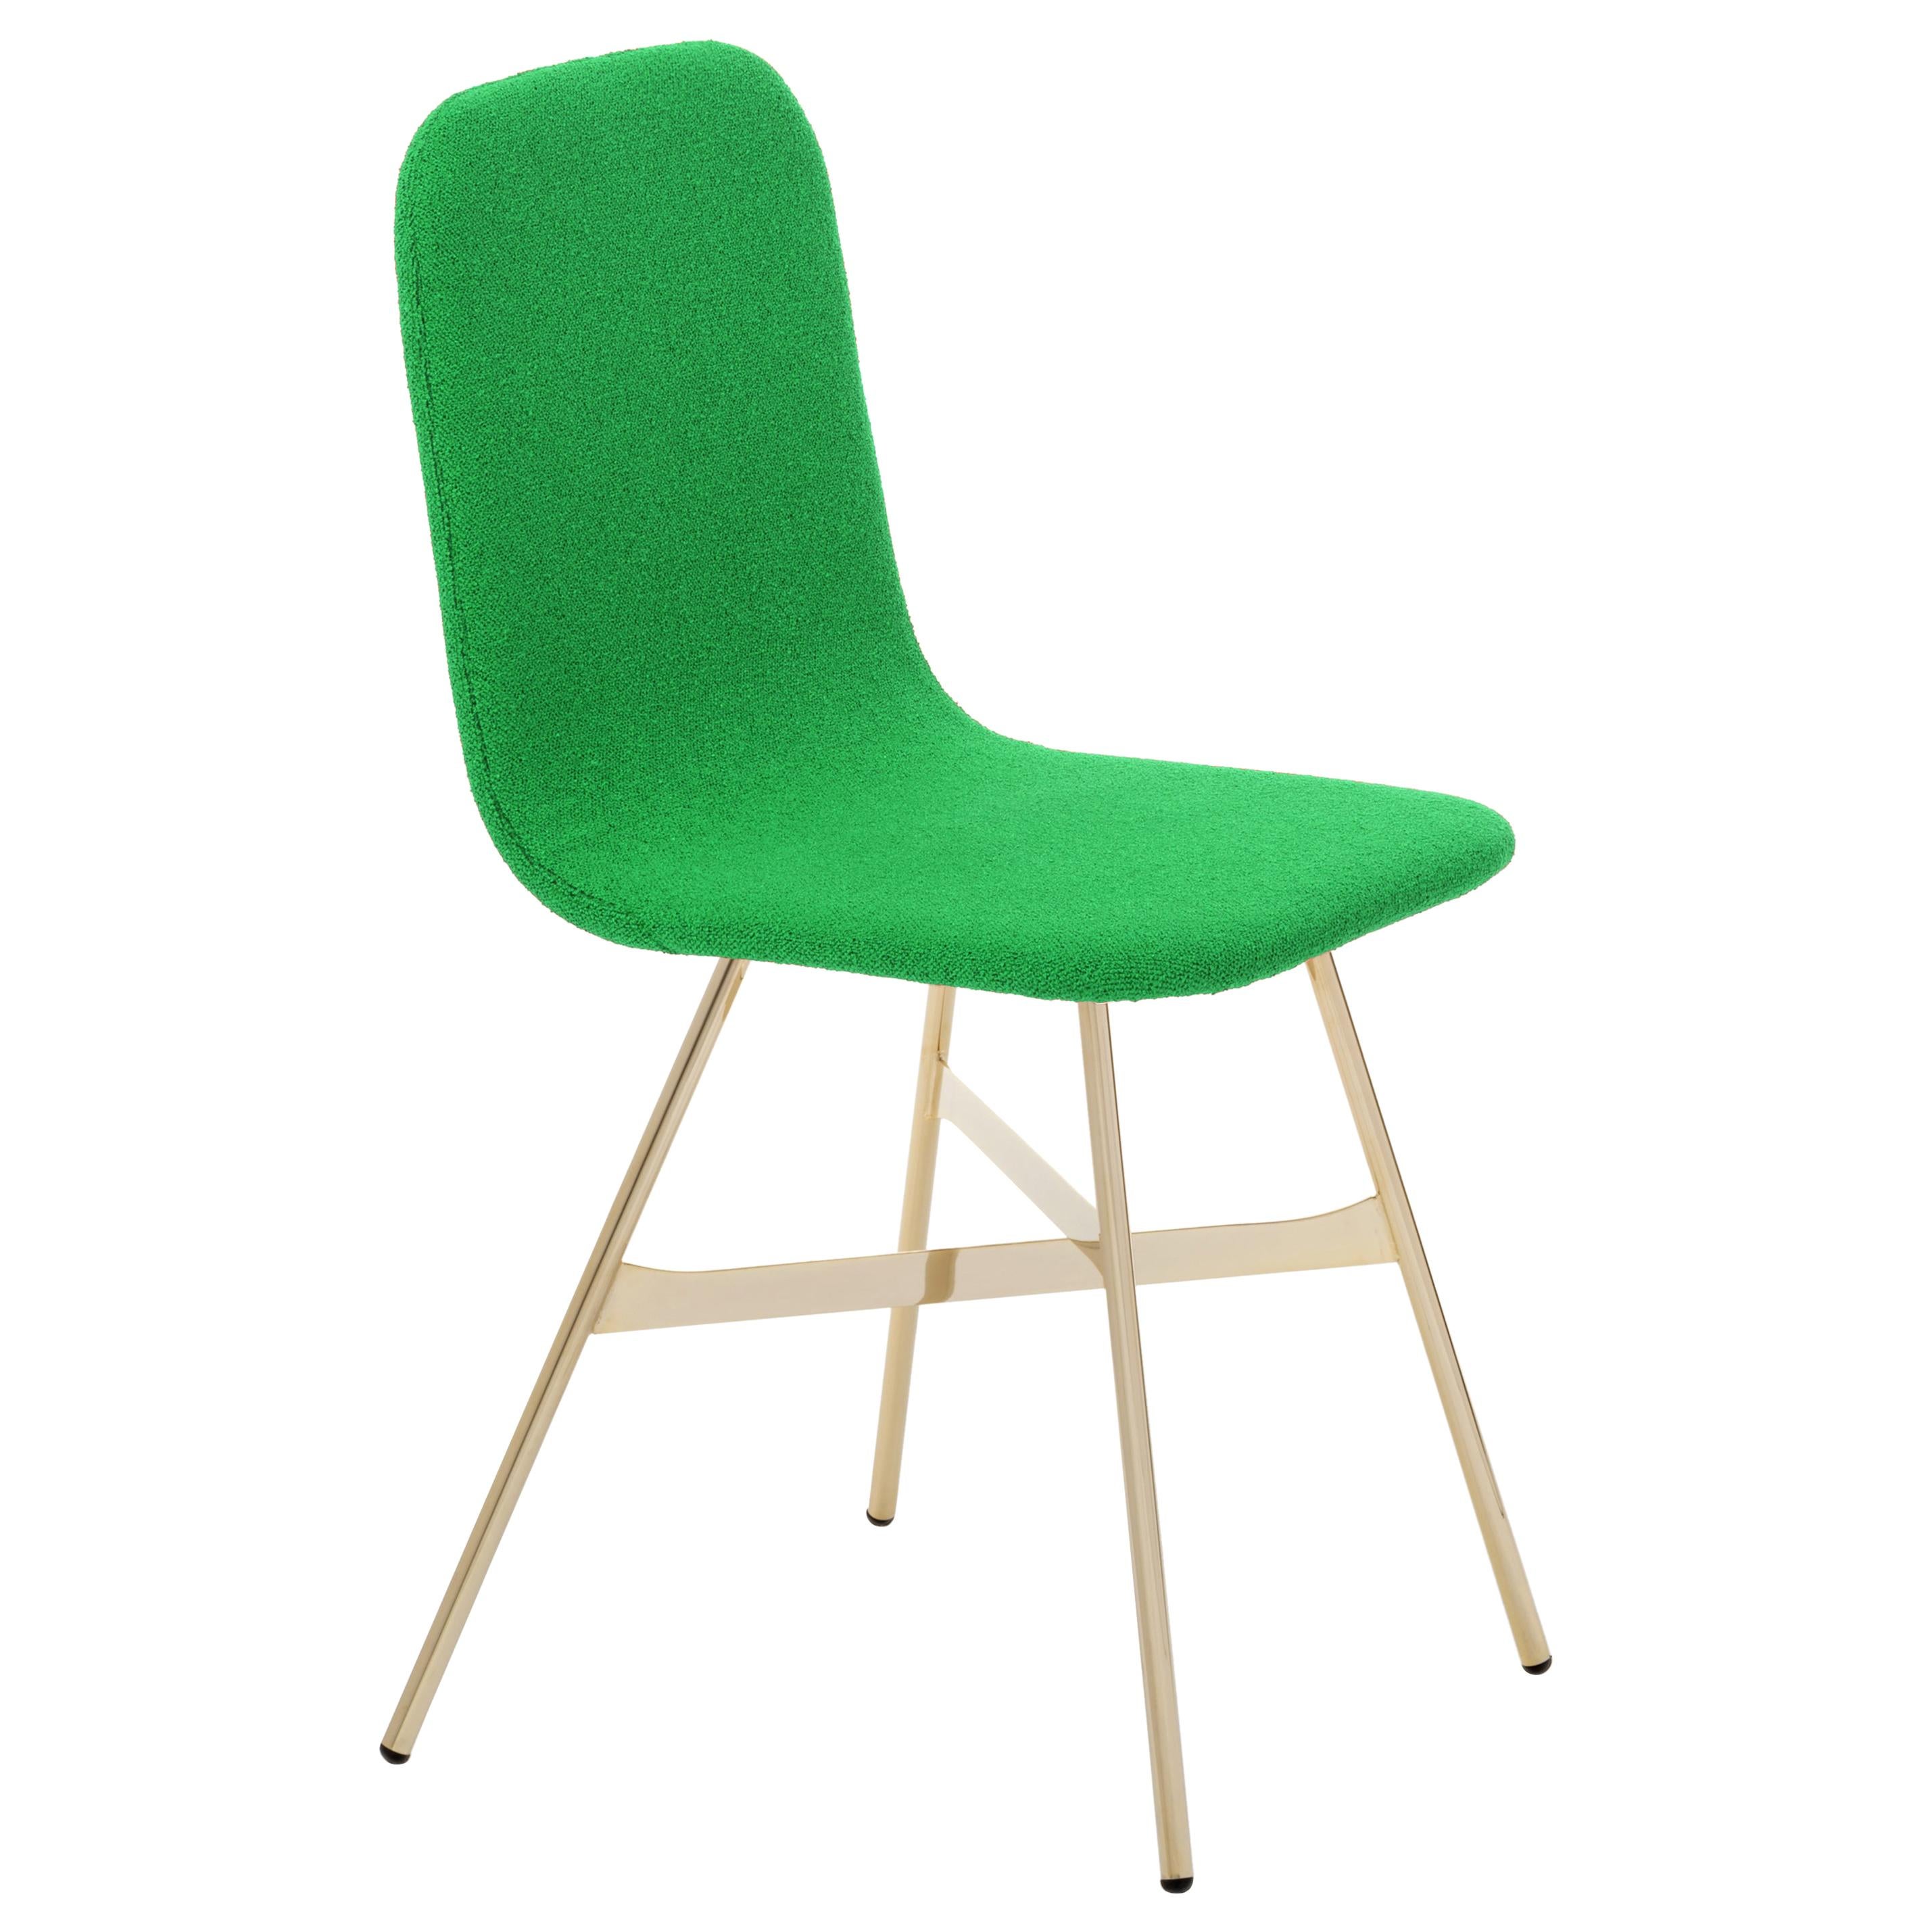 Tria Simple Chair Golden Legs Upholstered in Mint Green Velvet Made in Italy For Sale